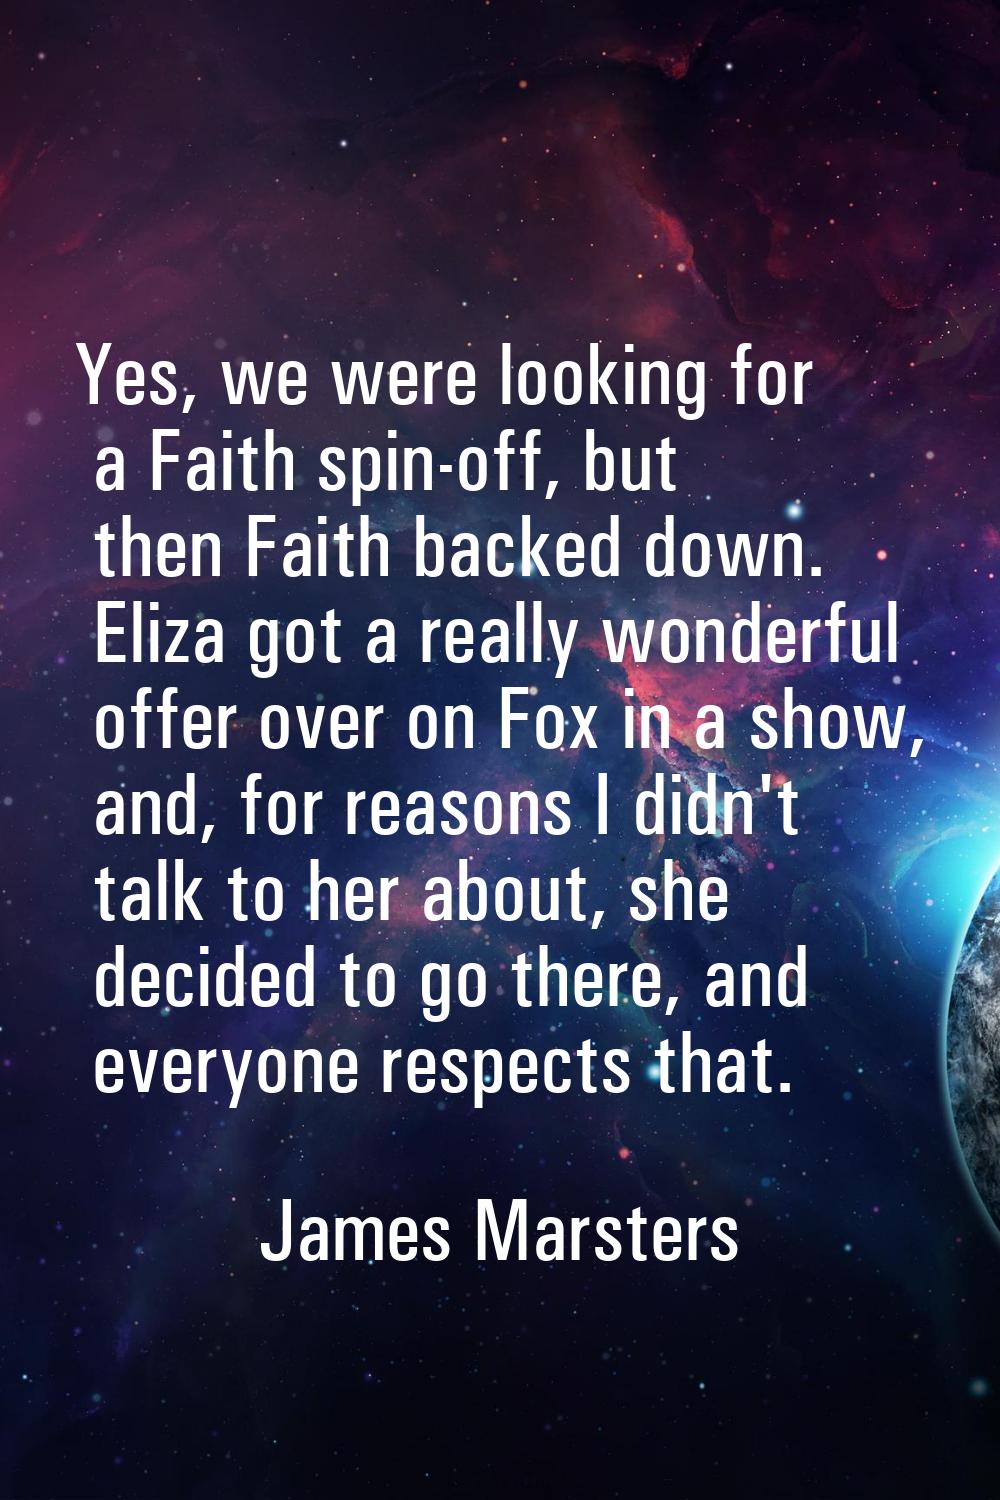 Yes, we were looking for a Faith spin-off, but then Faith backed down. Eliza got a really wonderful